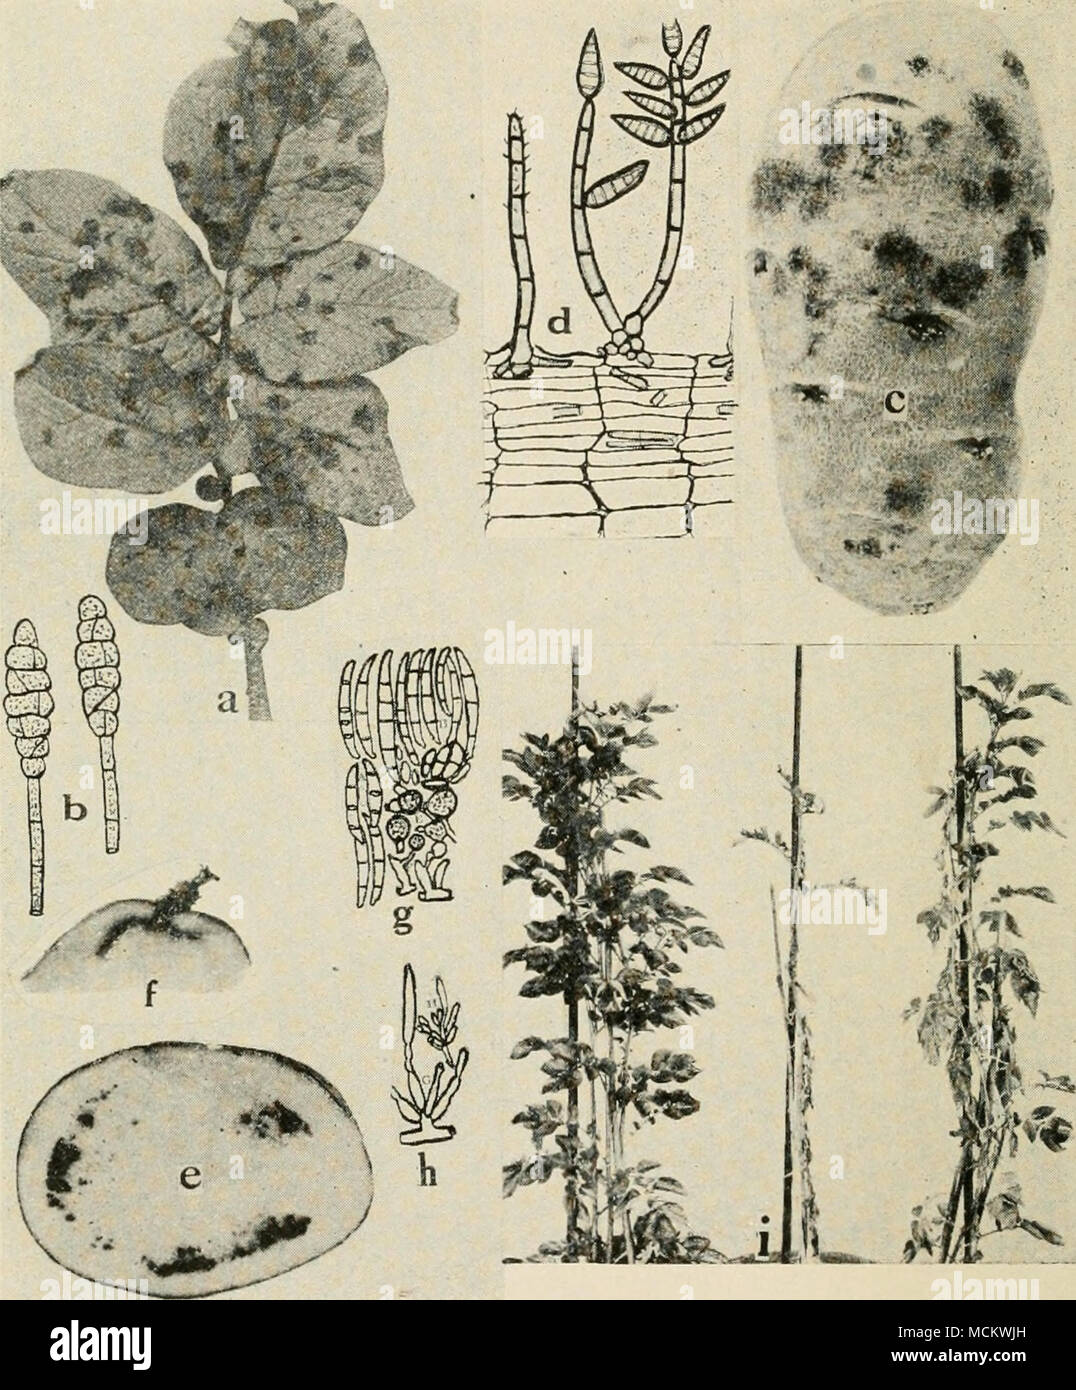 . Fig. 62. Potato Diseases. a. Early blight (after L. R. Jonej), b. spores of the early blight fungus, c. silver scurf, d. conidiophores and conidia of the silver scurf fungus, e. and /. Fusarium oxysporum wilt in tubers, g. chlamydospores and one to several celled conidia of F. oxysporum, h. conidiophores of F. oxysporum {g. and h. after Sherbakoff), i. Ver- ticillium wilt (after Orton). Stock Photo